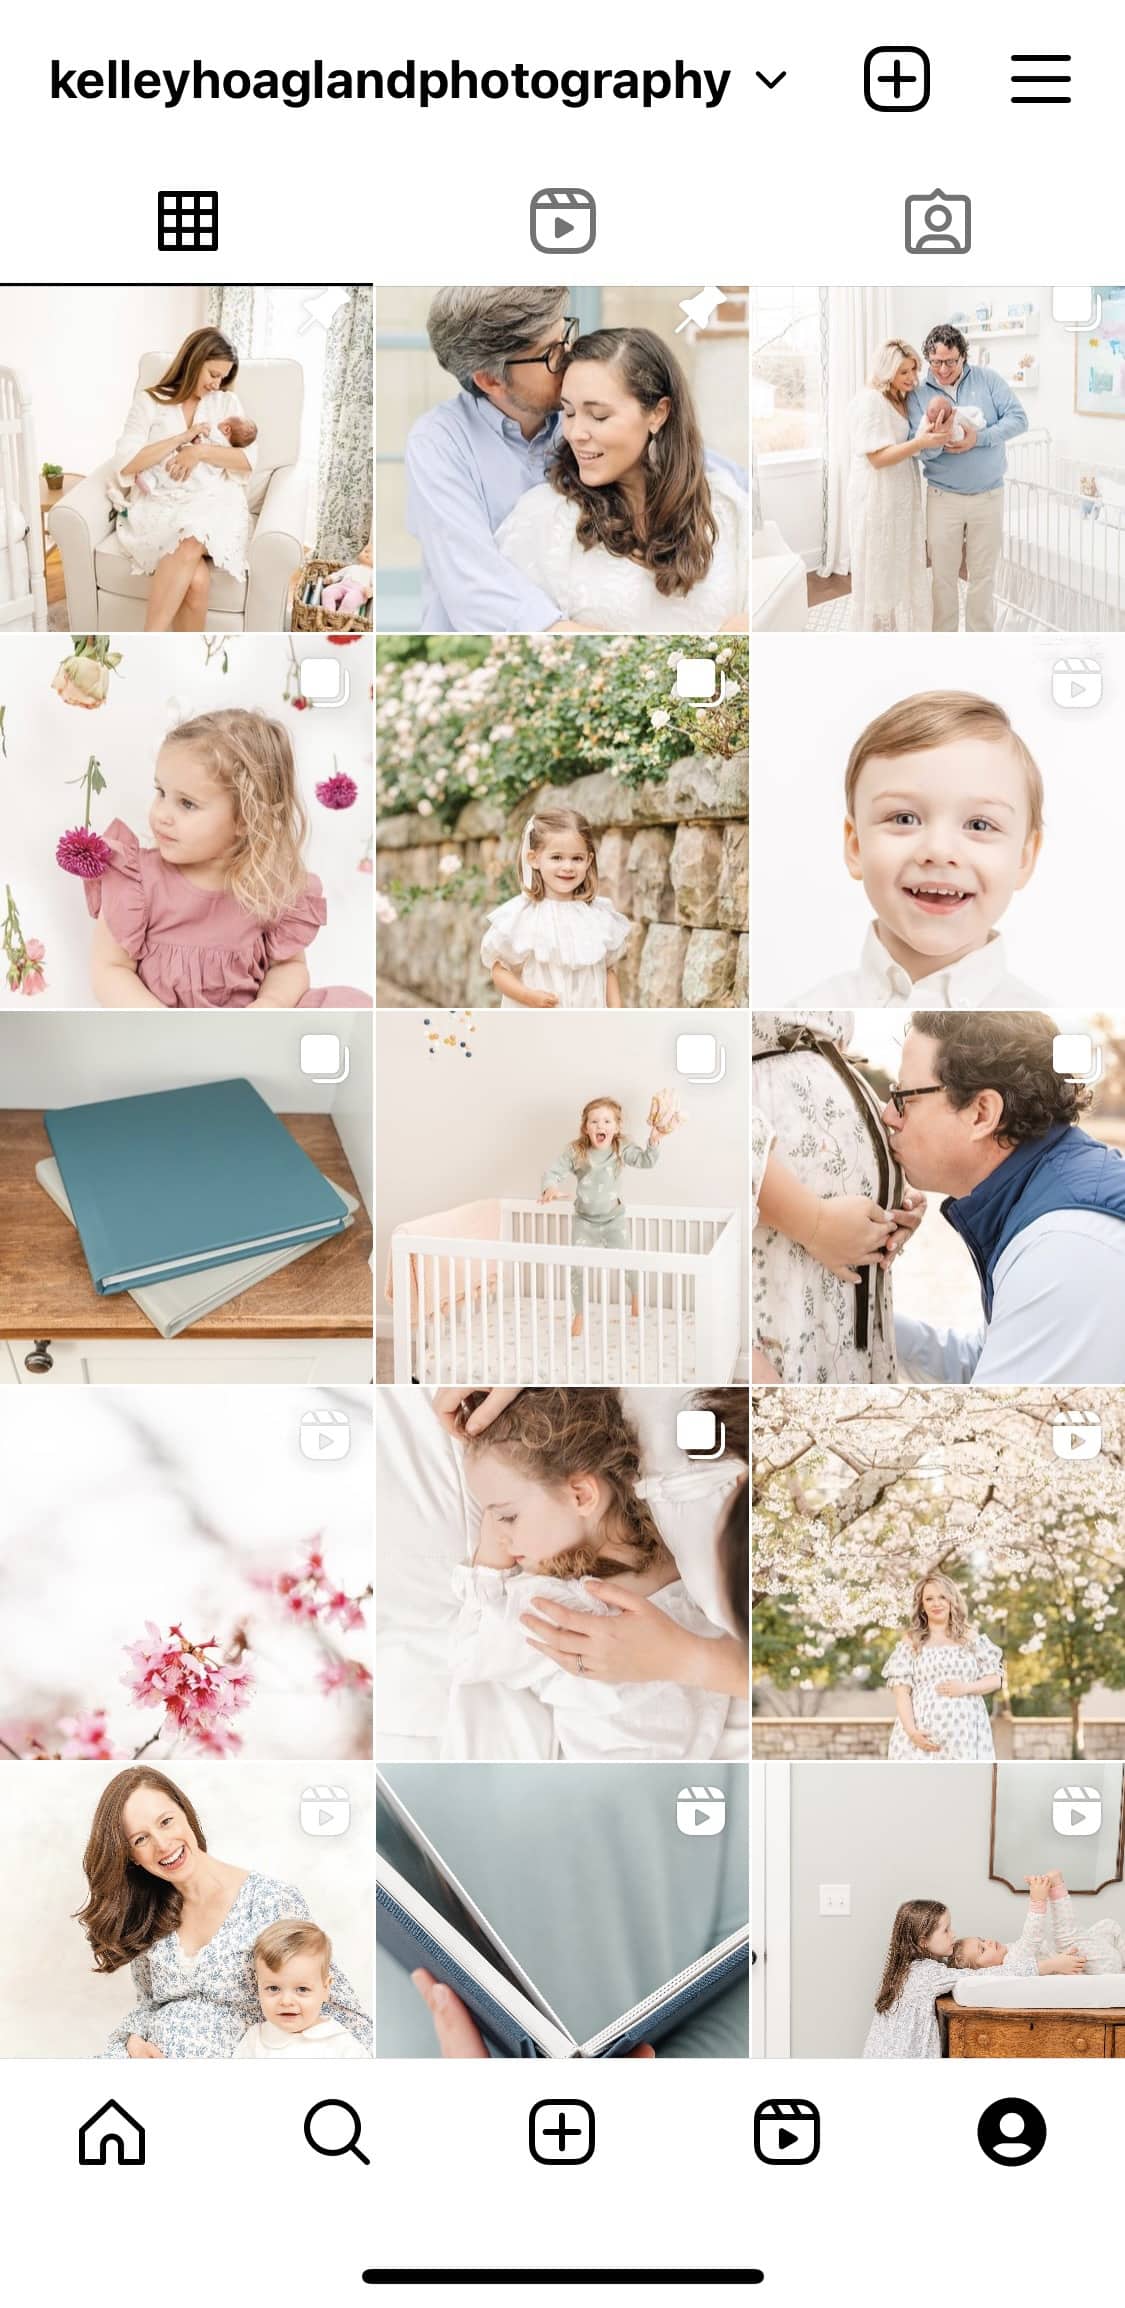 Consistent instagram feed from using flash for indoor photography sessions.